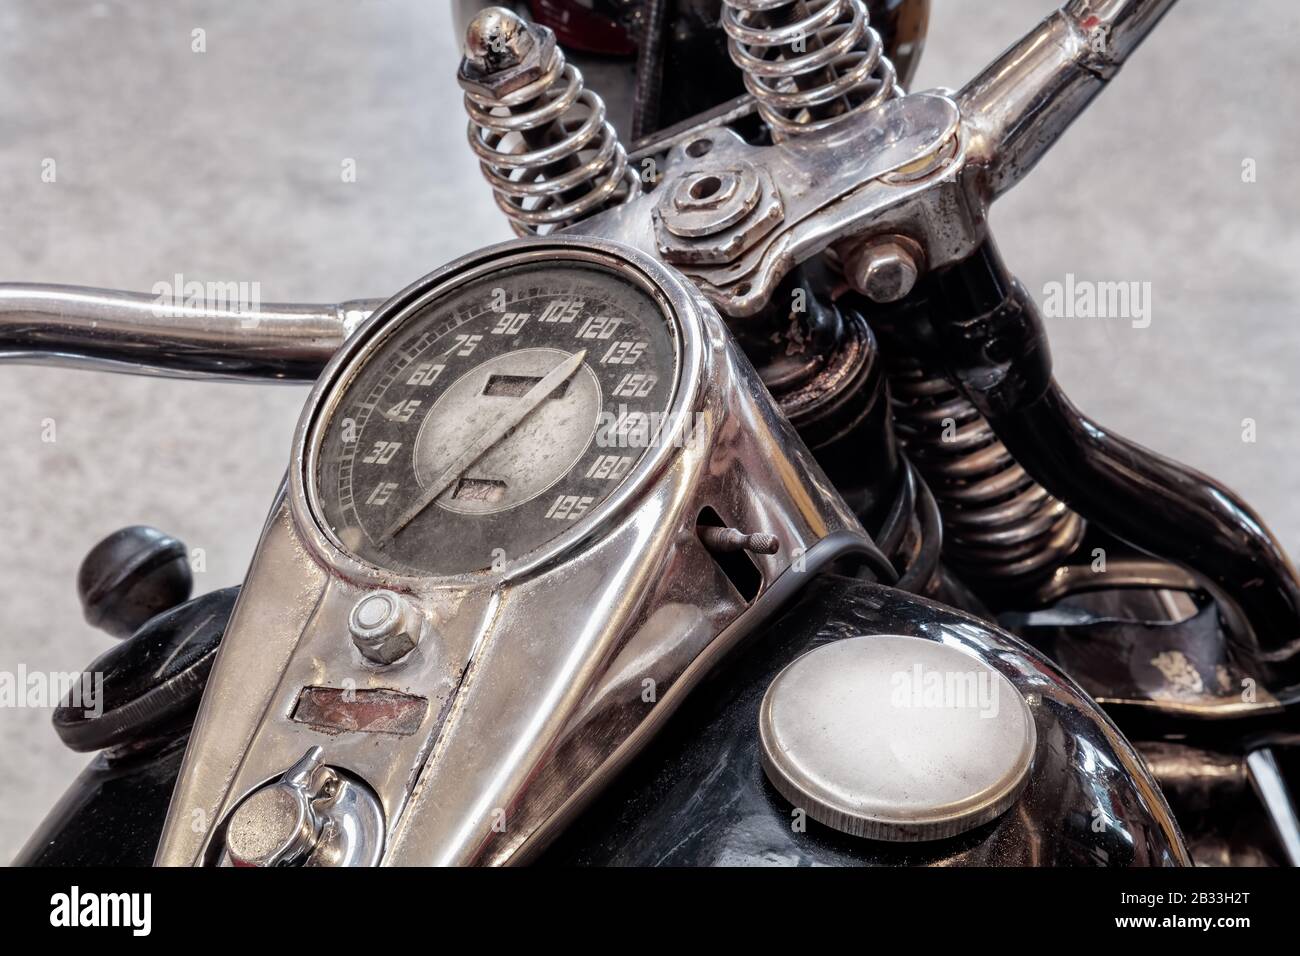 Close up of the tank and speedometer of a vintage motorcycle Stock Photo